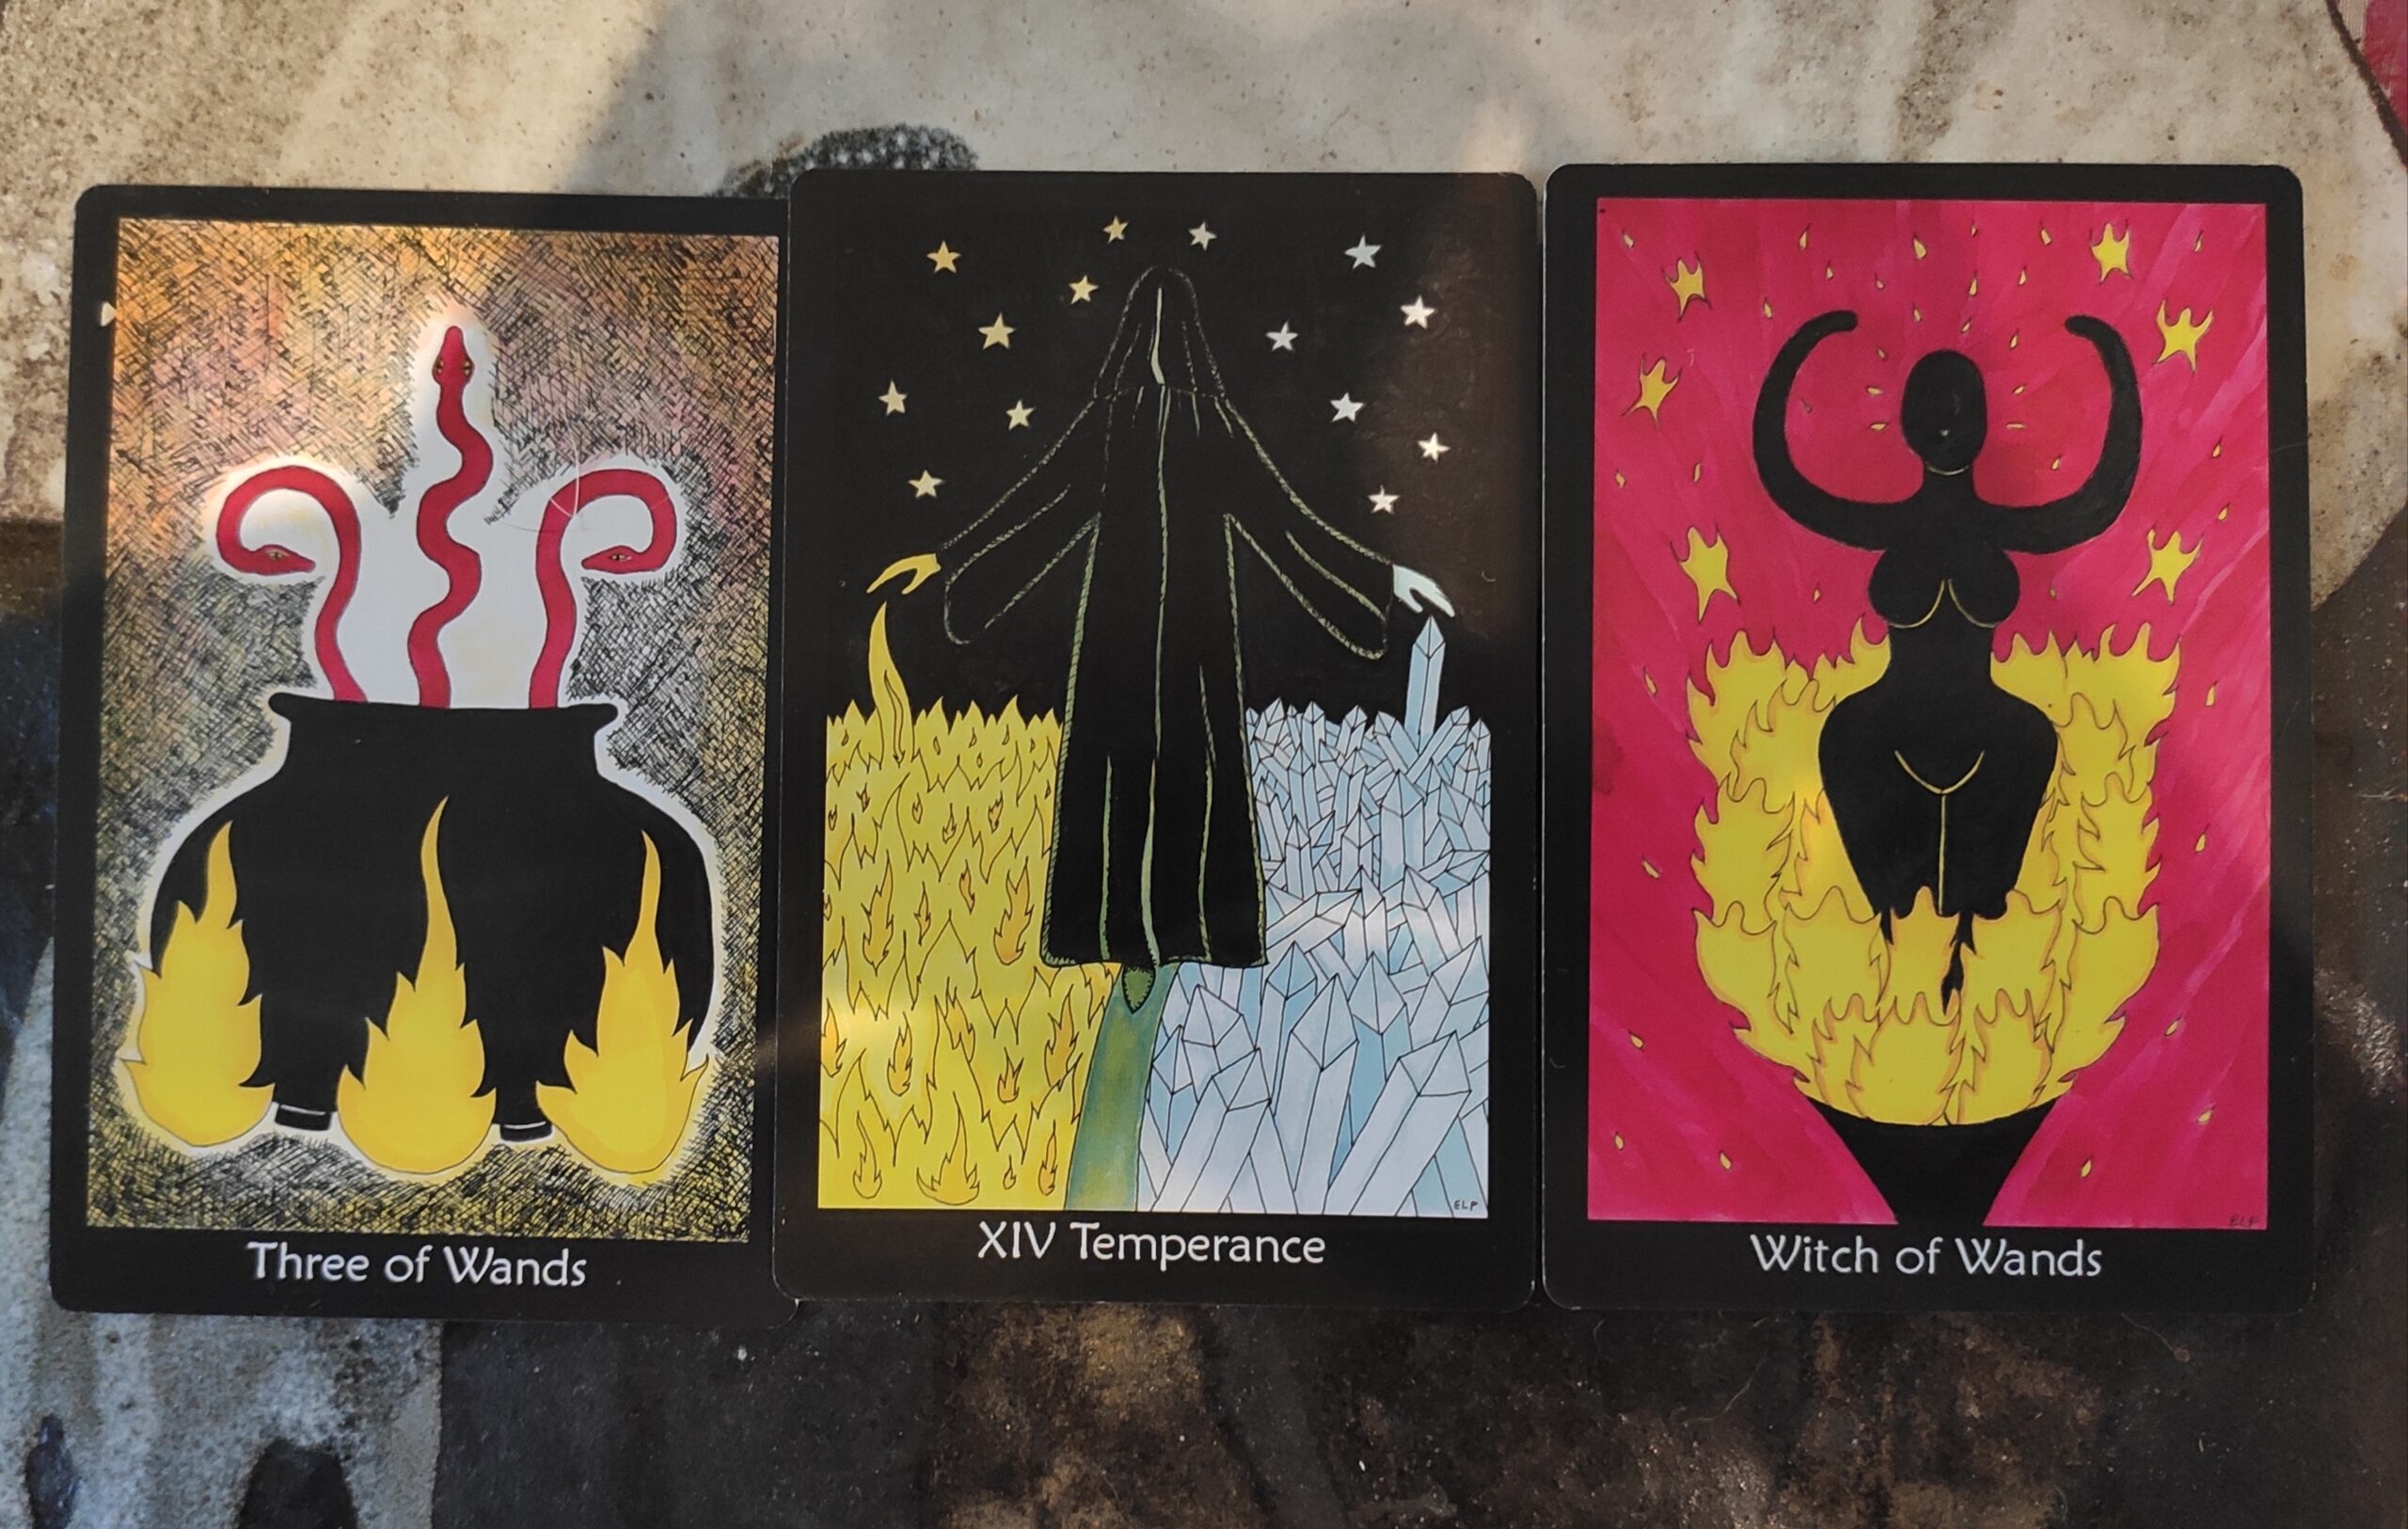 A reading with the tarot of the Crone